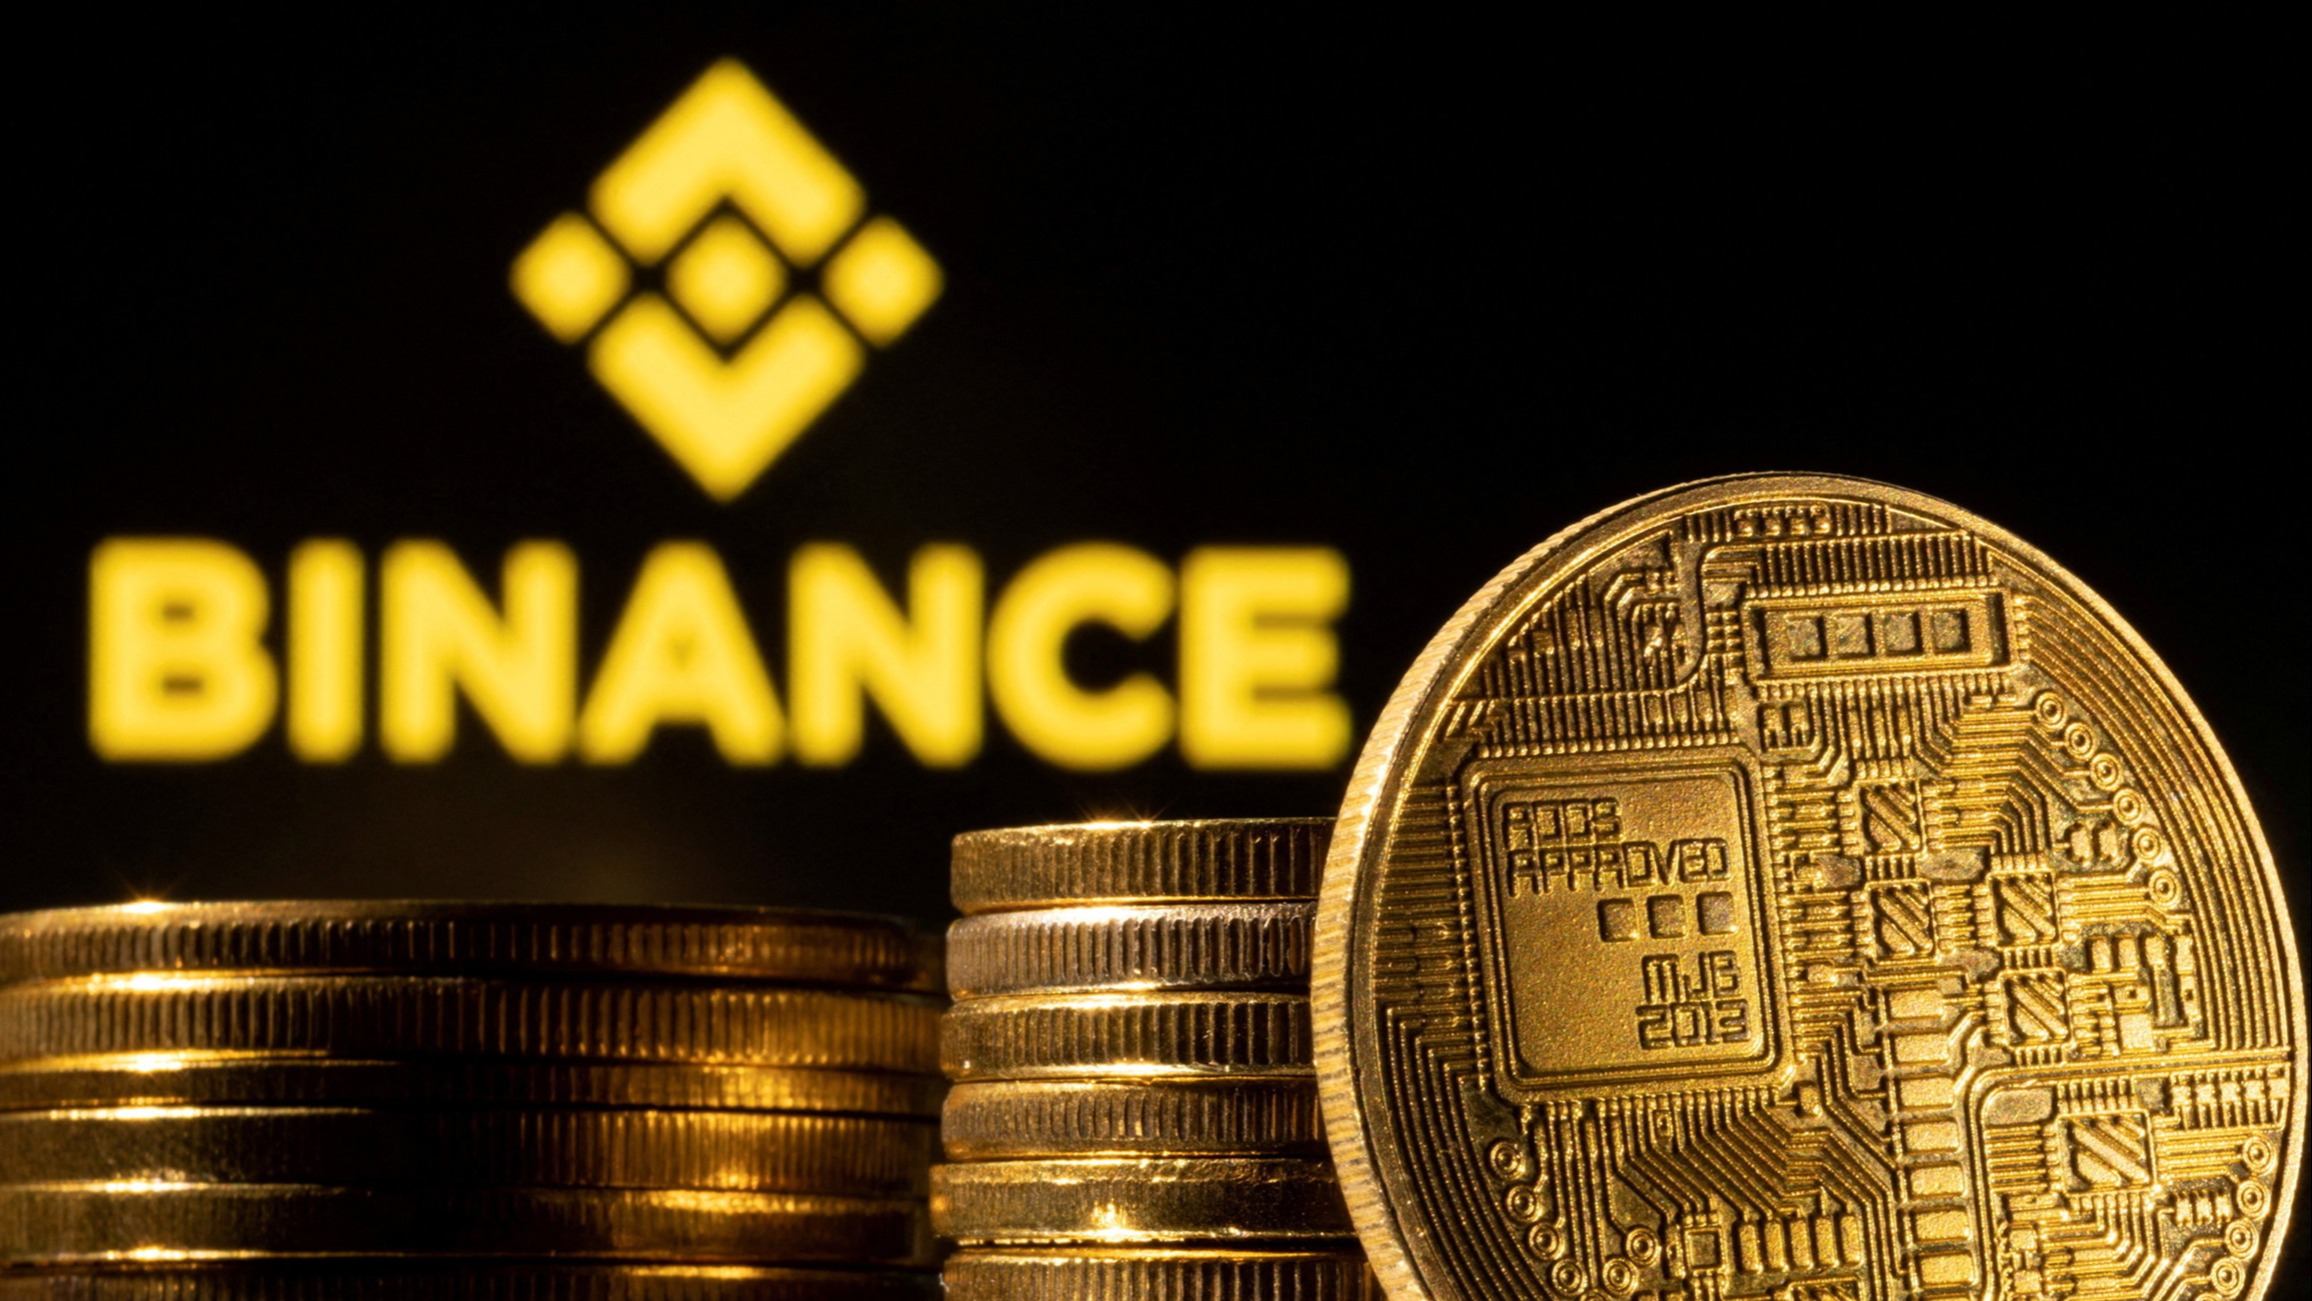 Binance Could Leave Cyprus Due to SEC Case